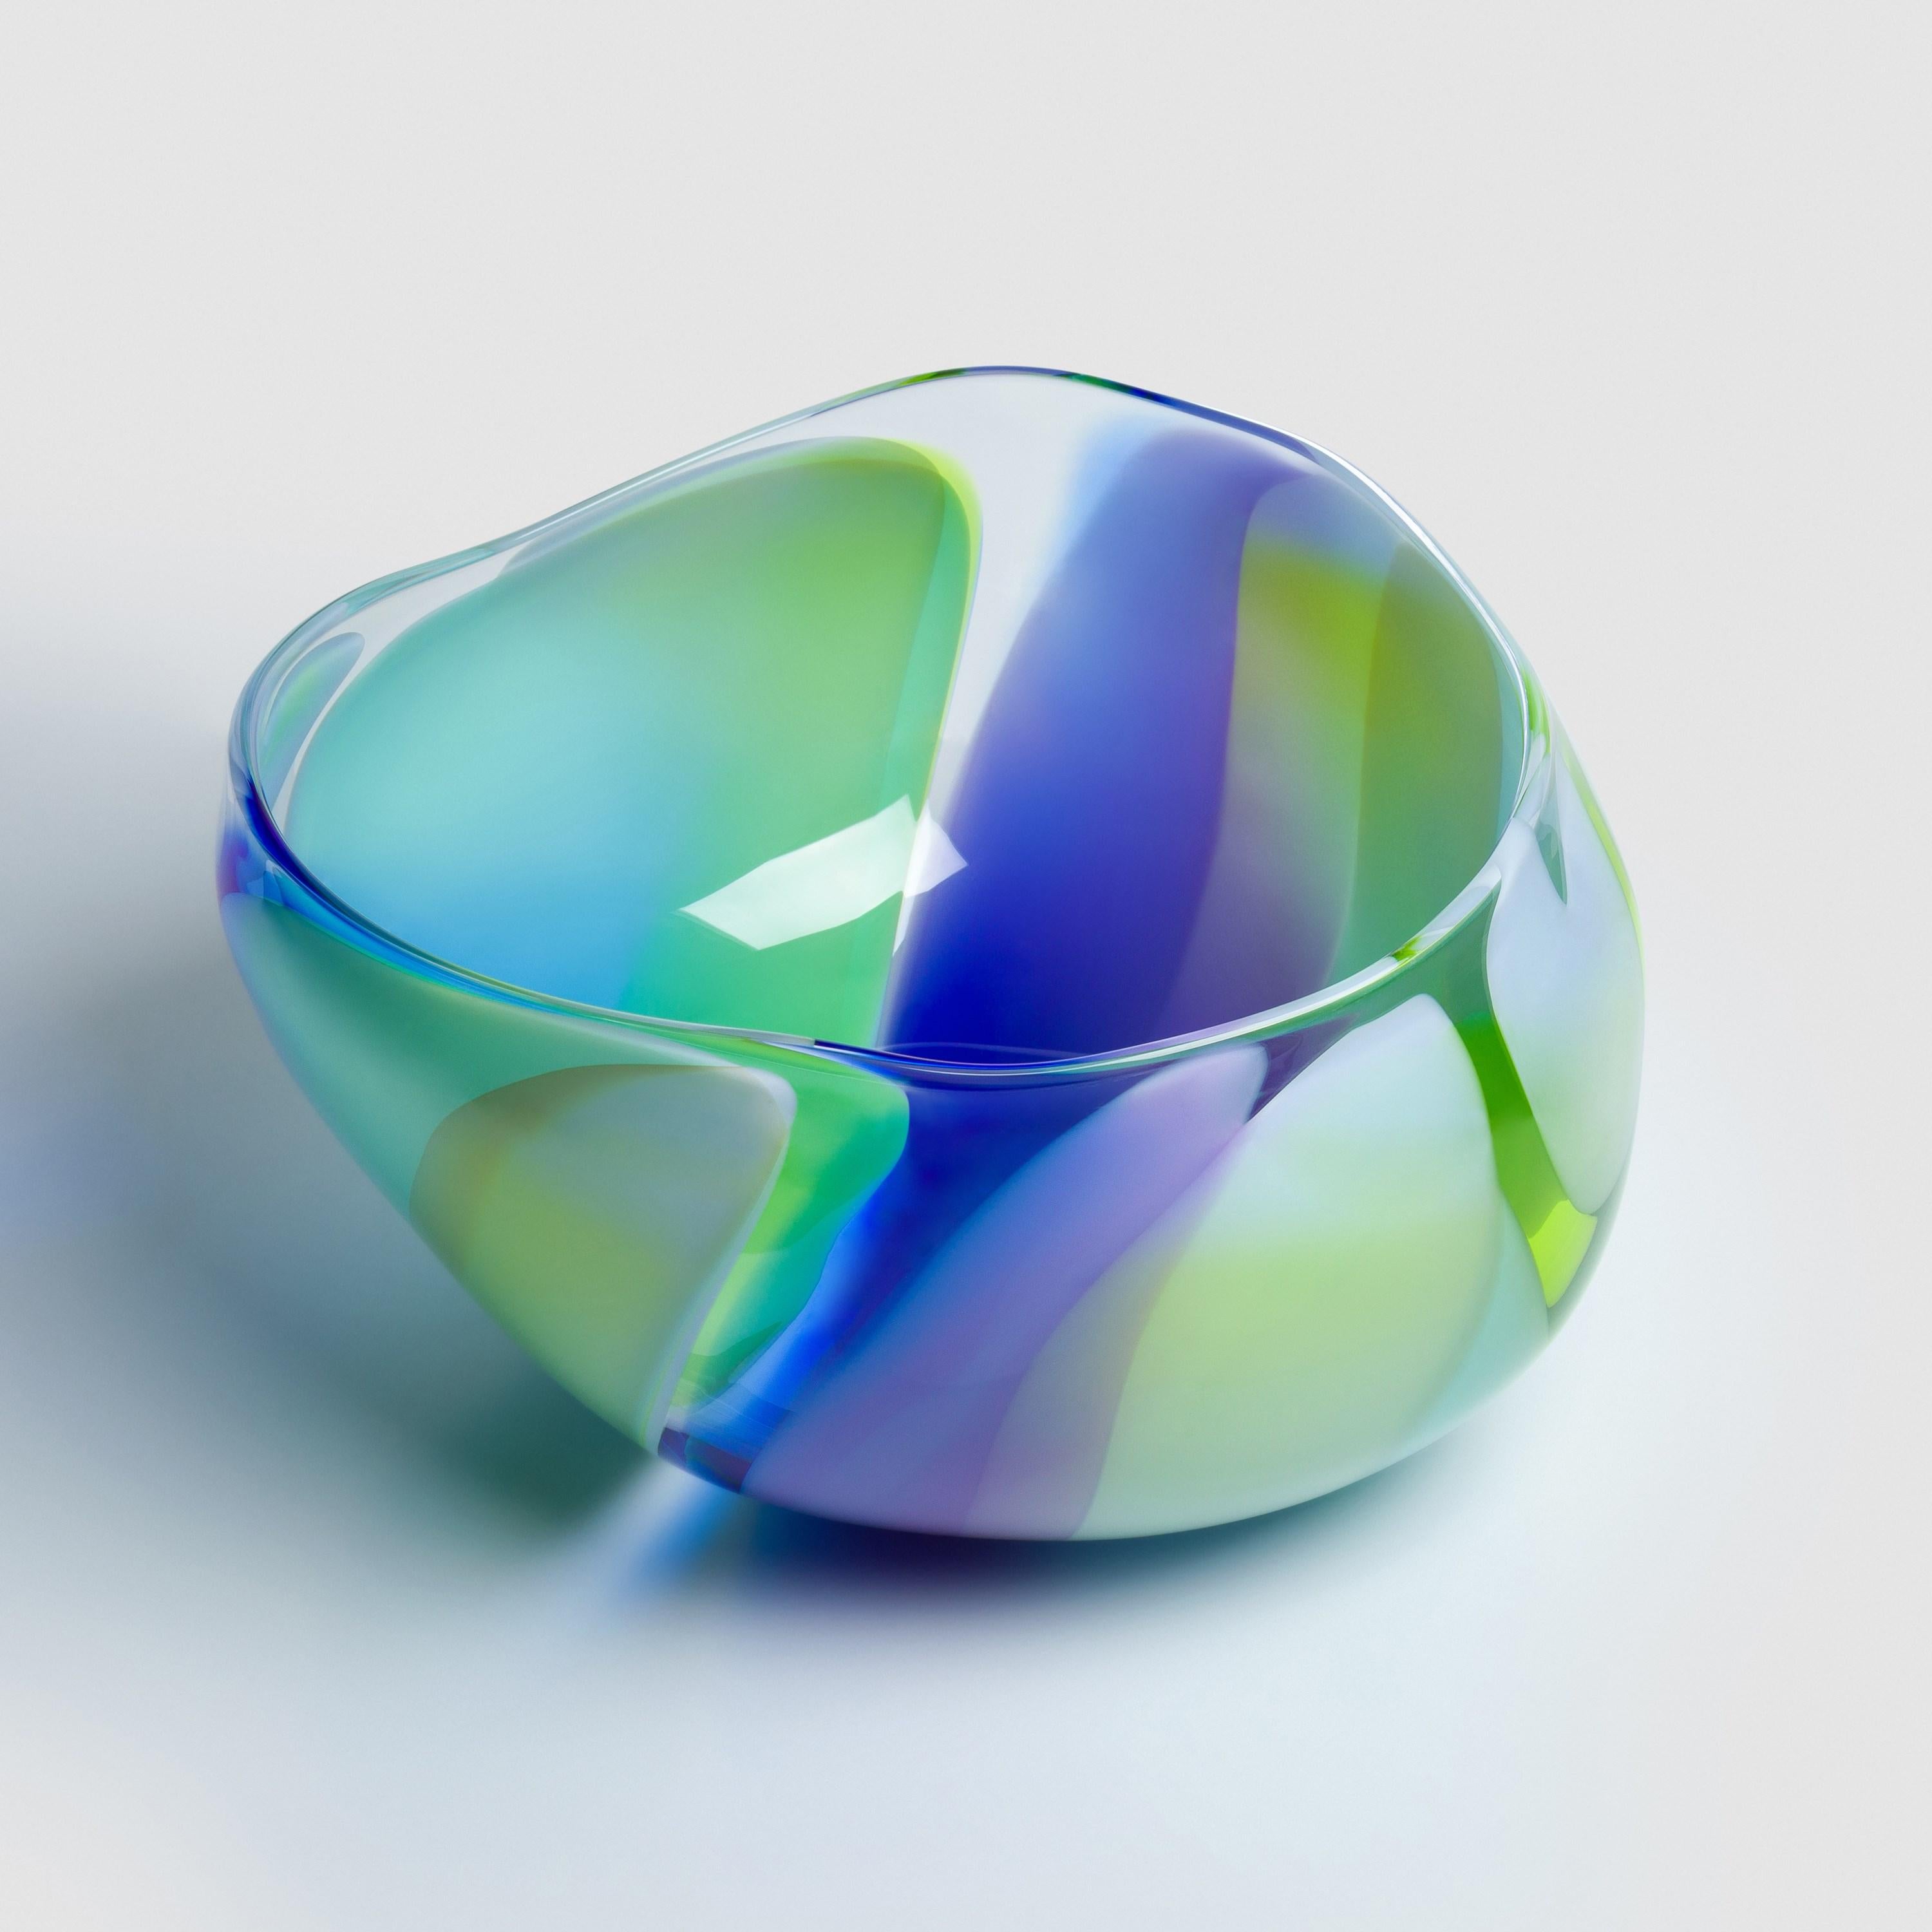 British  Waves No 654, a blue, lime & aqua abstract handblown glass bowl by Neil Wilkin For Sale